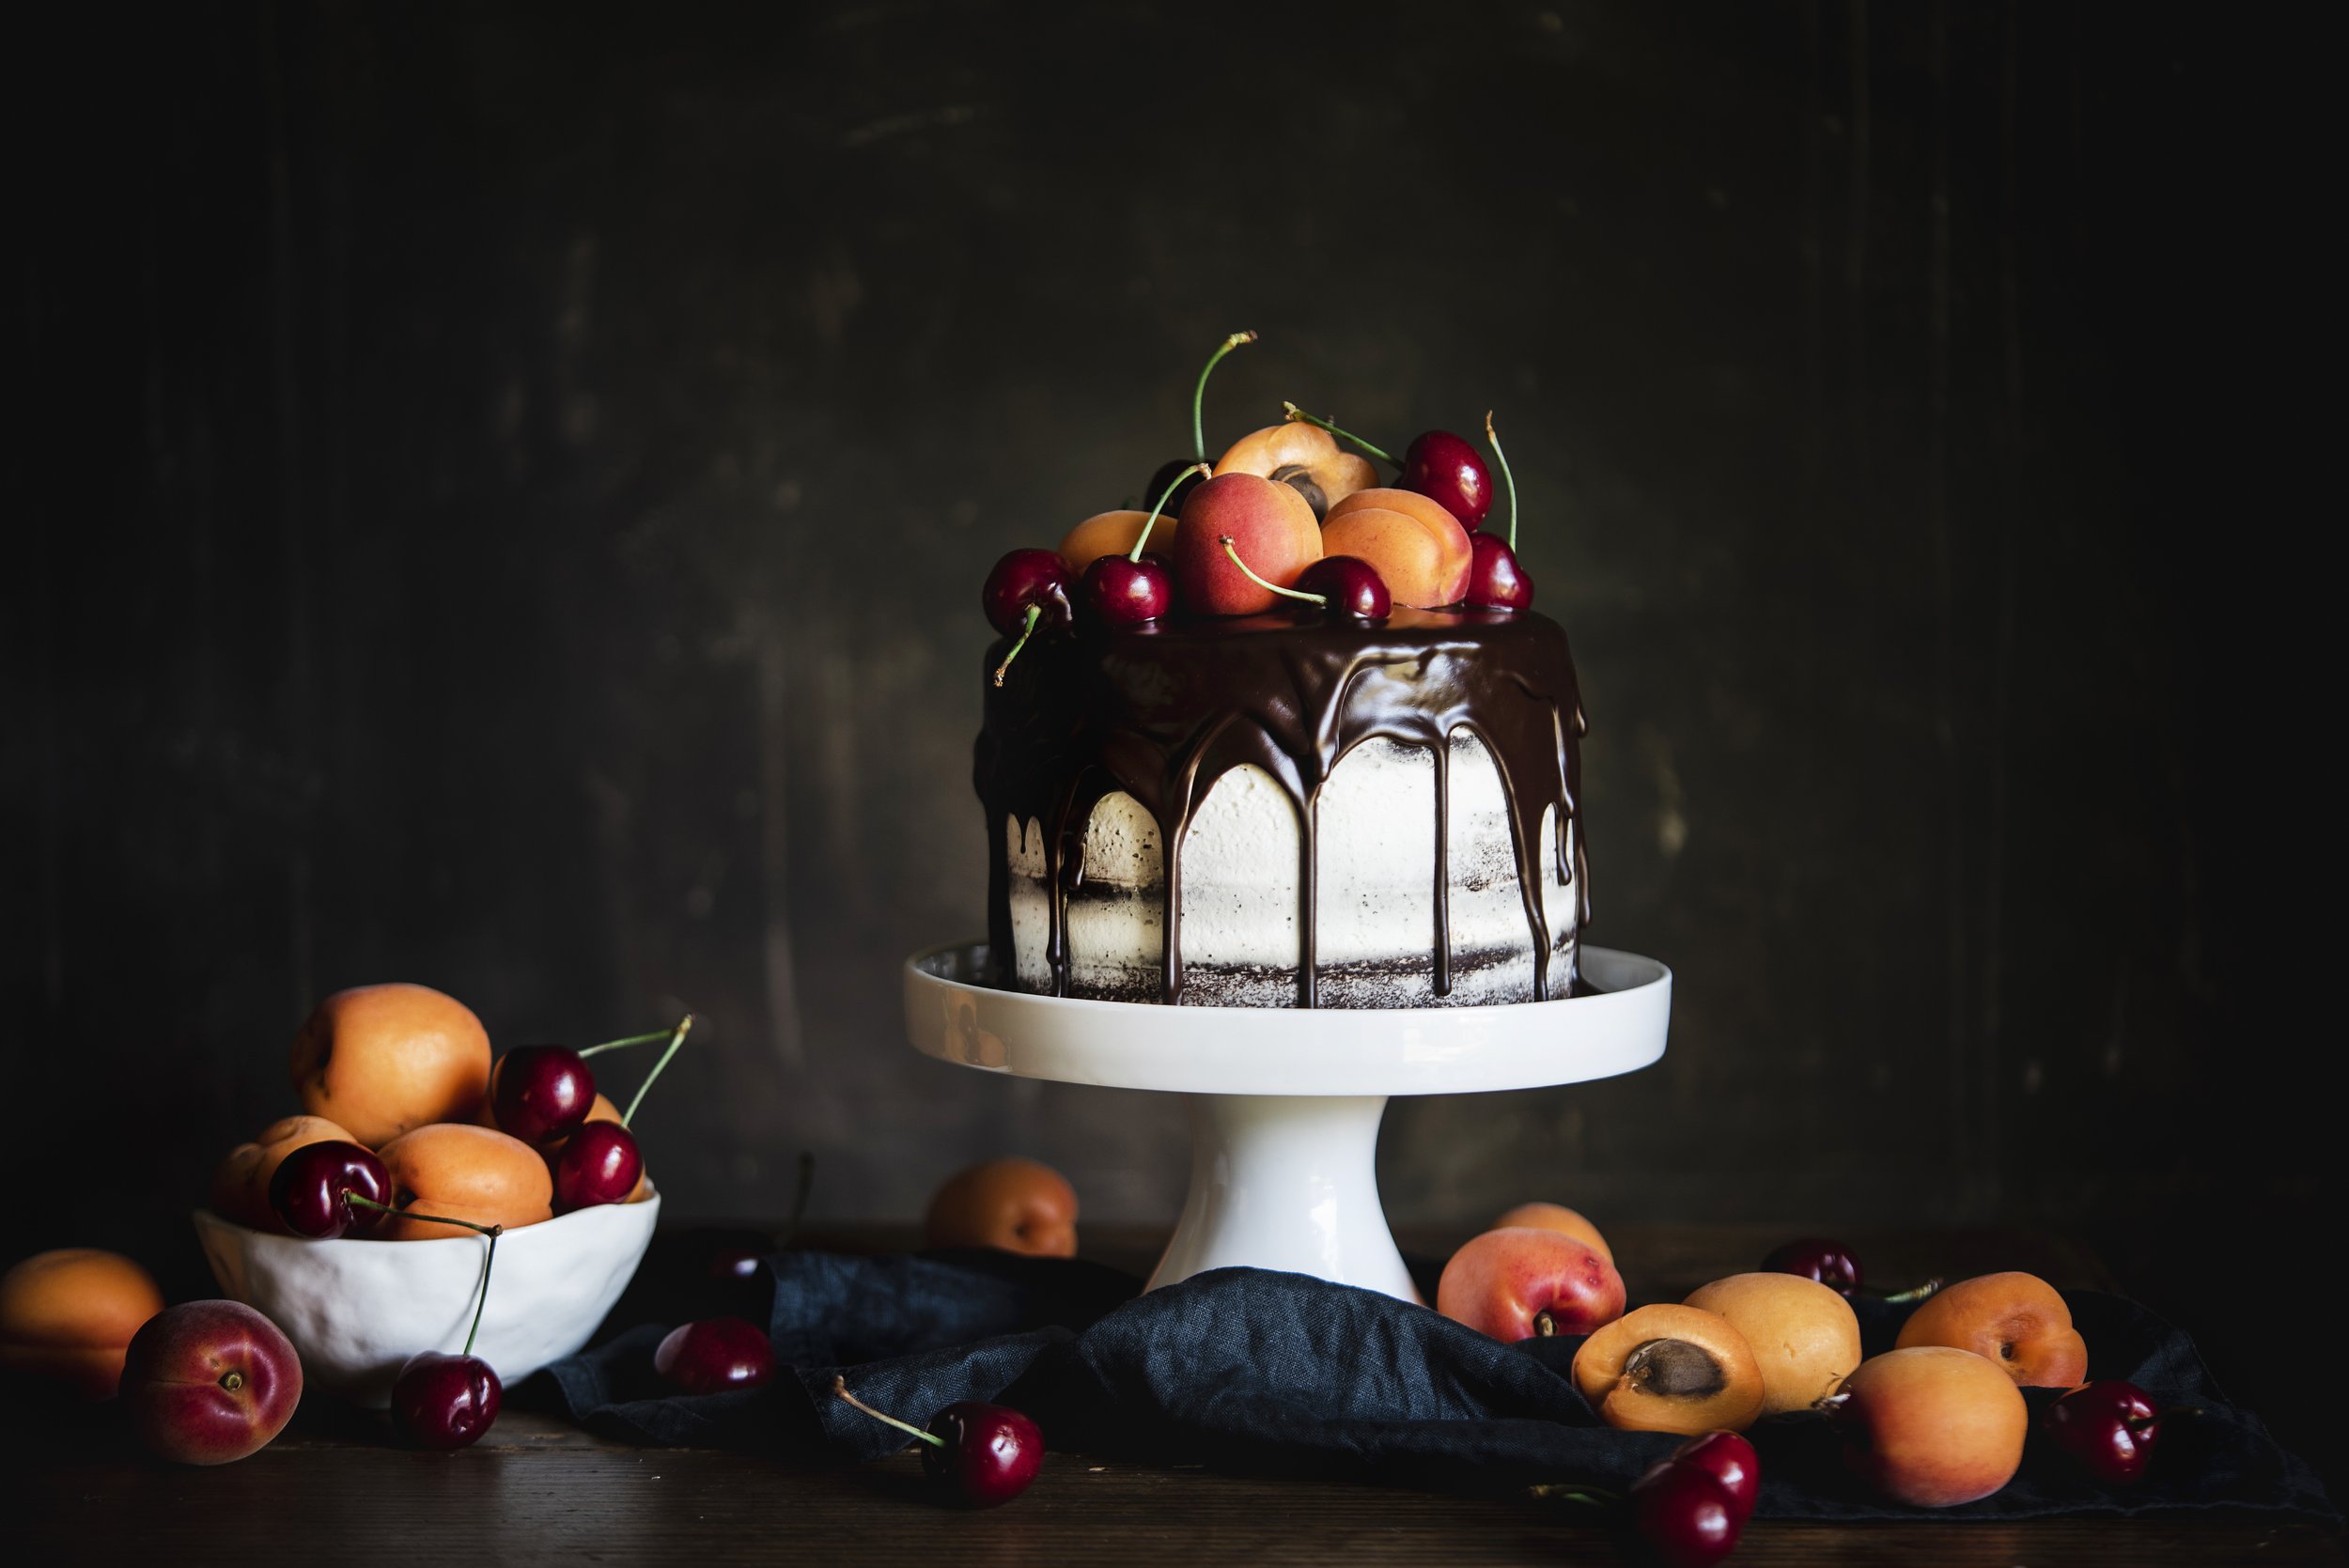 StockFood_12666568_HiRes_Chocolate_Cake_with_Apricots_and_Cherries.jpg